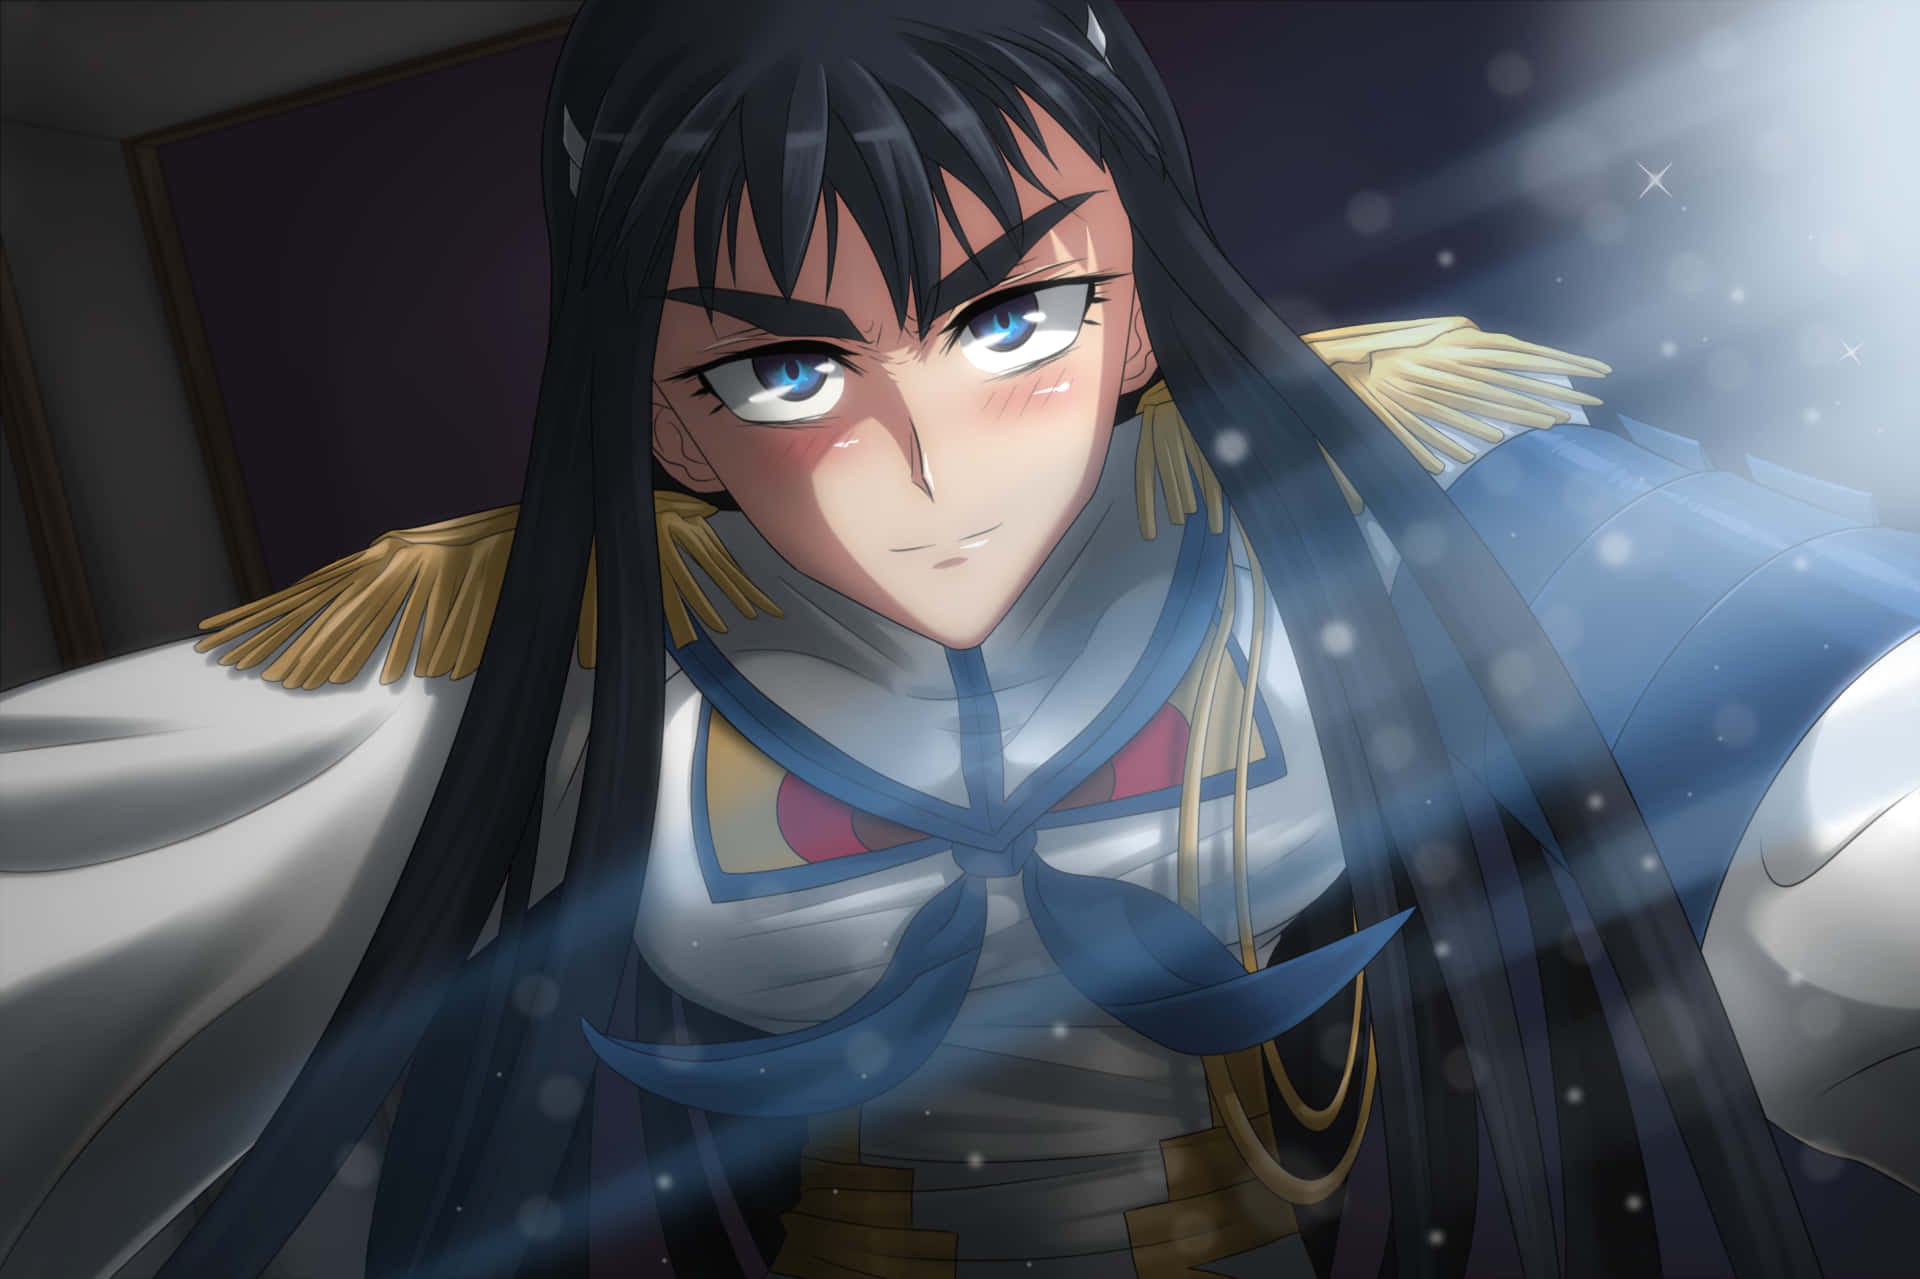 "Satsuki Kiryuin stands triumphant, surrounded by a flurry of blades." Wallpaper